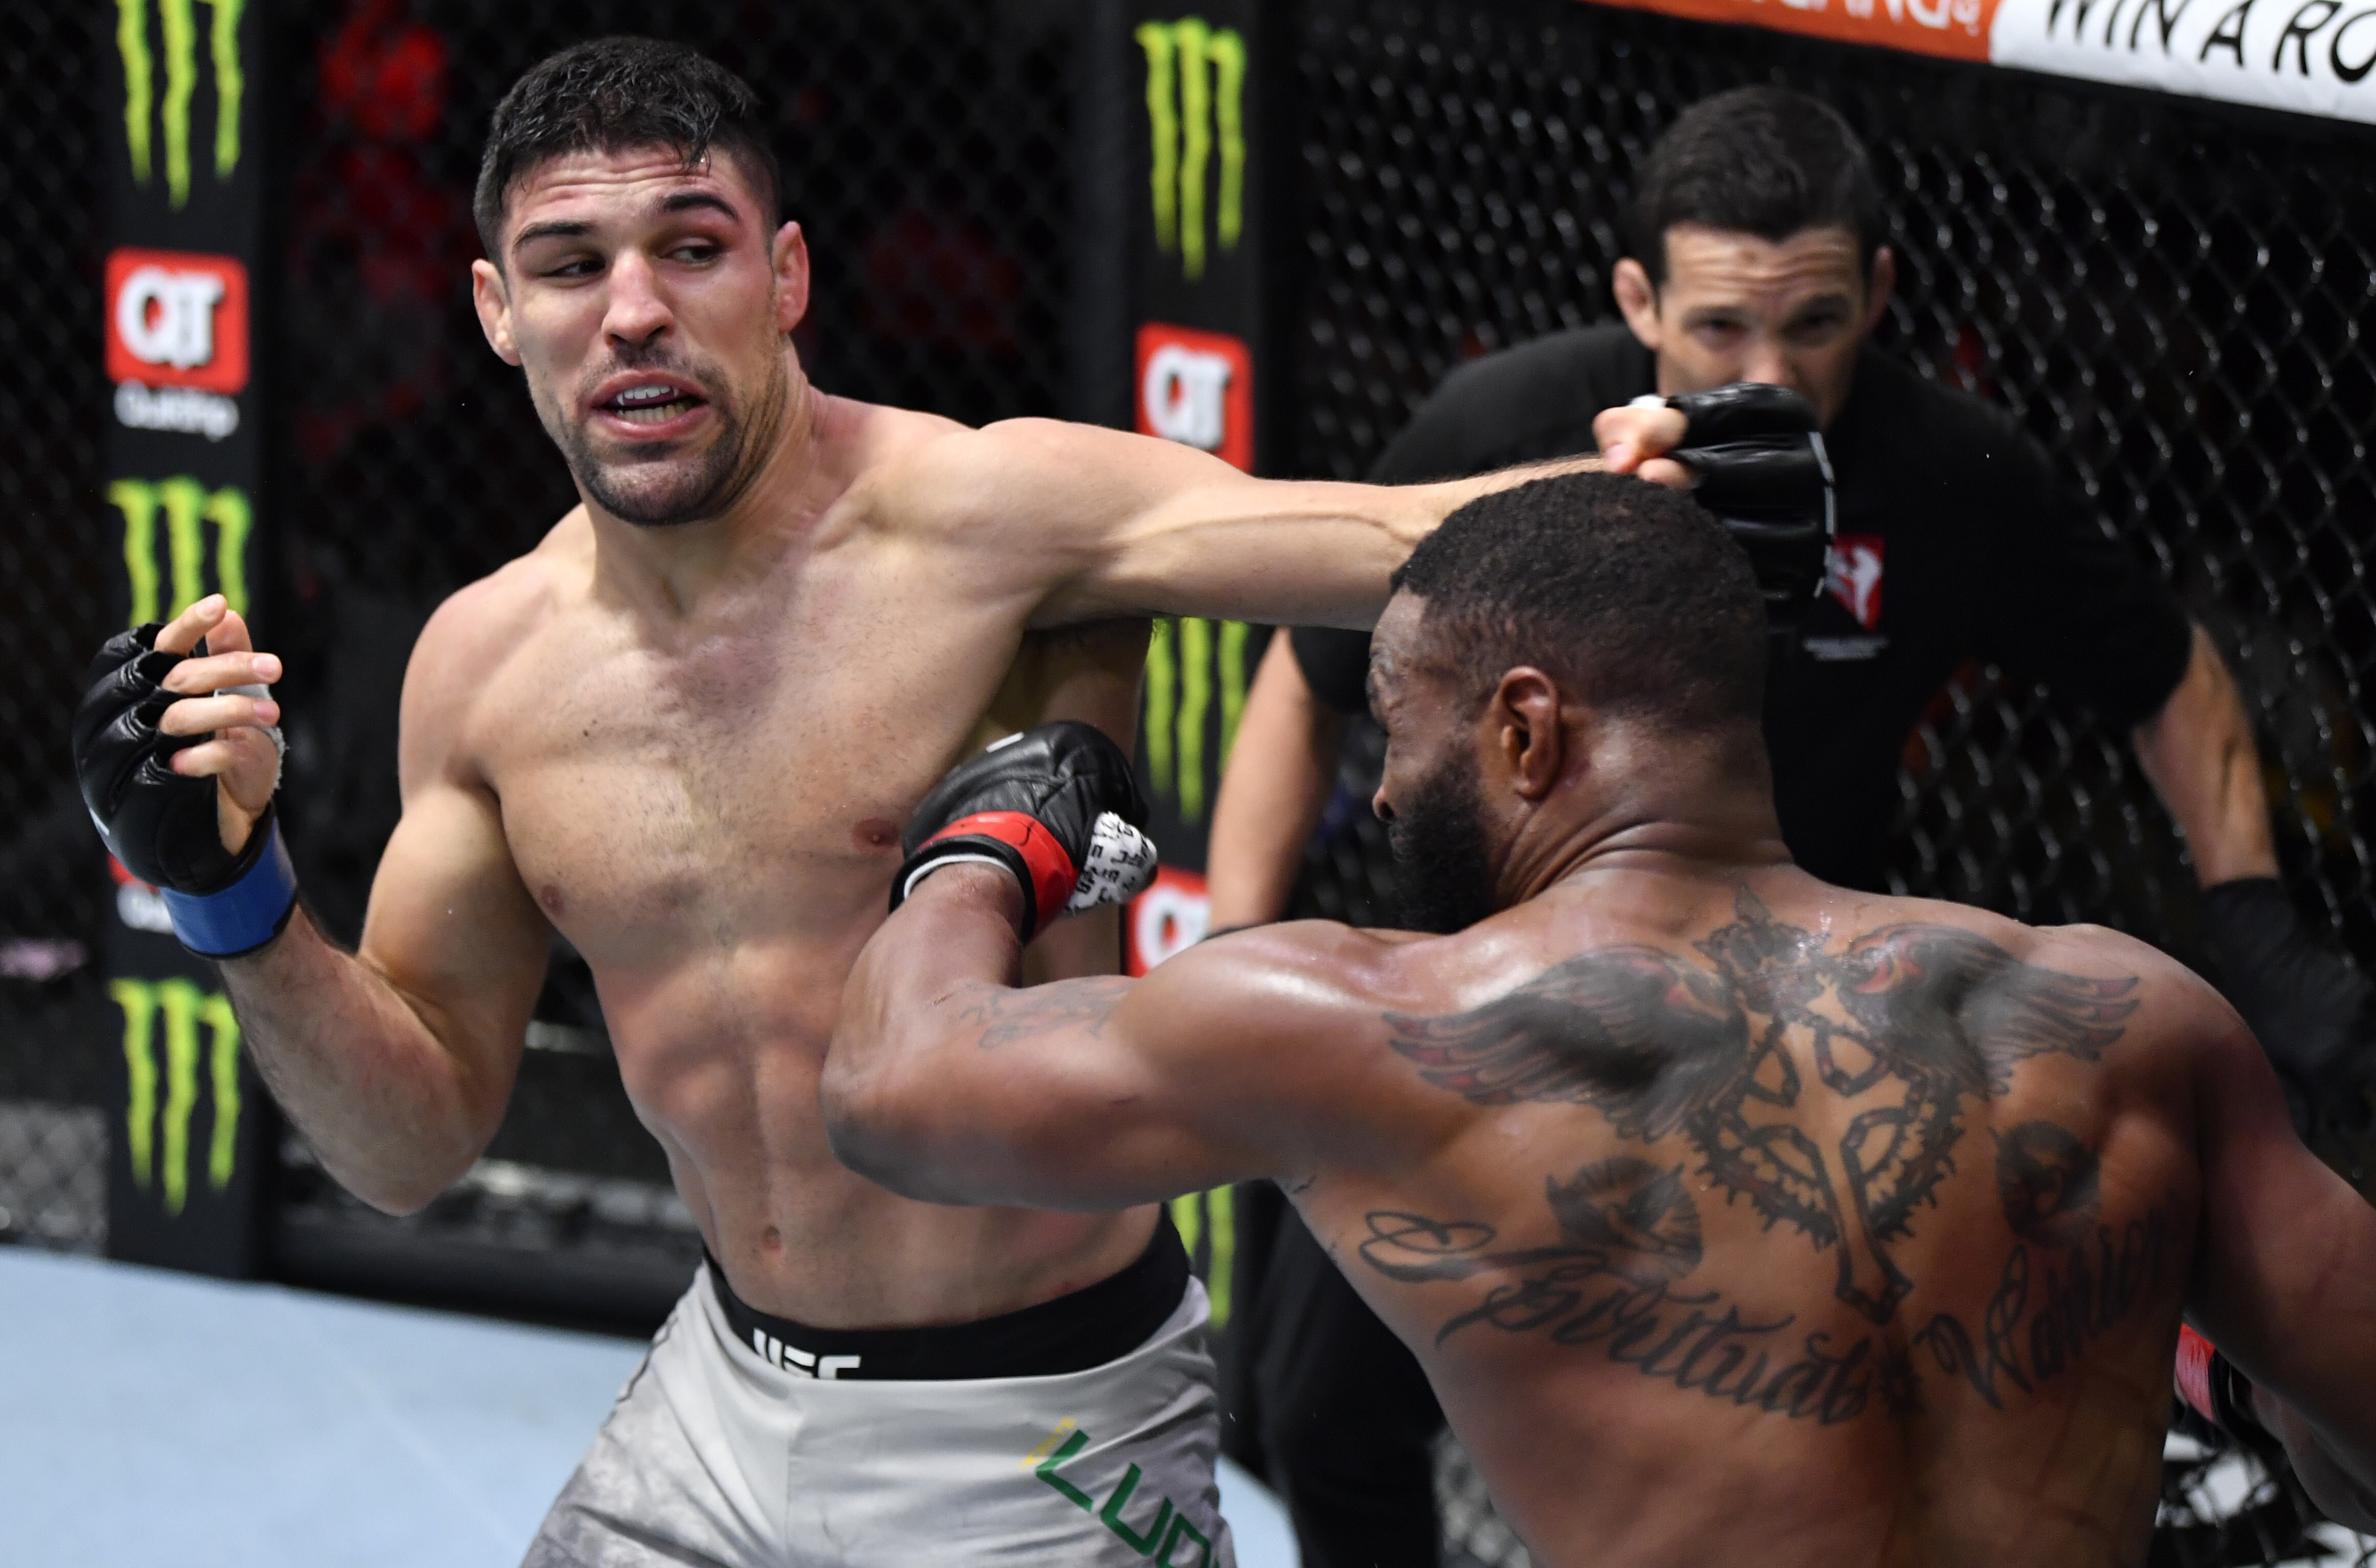 Vicente Luque punches Tyron Woodley in their welterweight fight at UFC 260. Photos: Jeff Bottari/Zuffa LLC